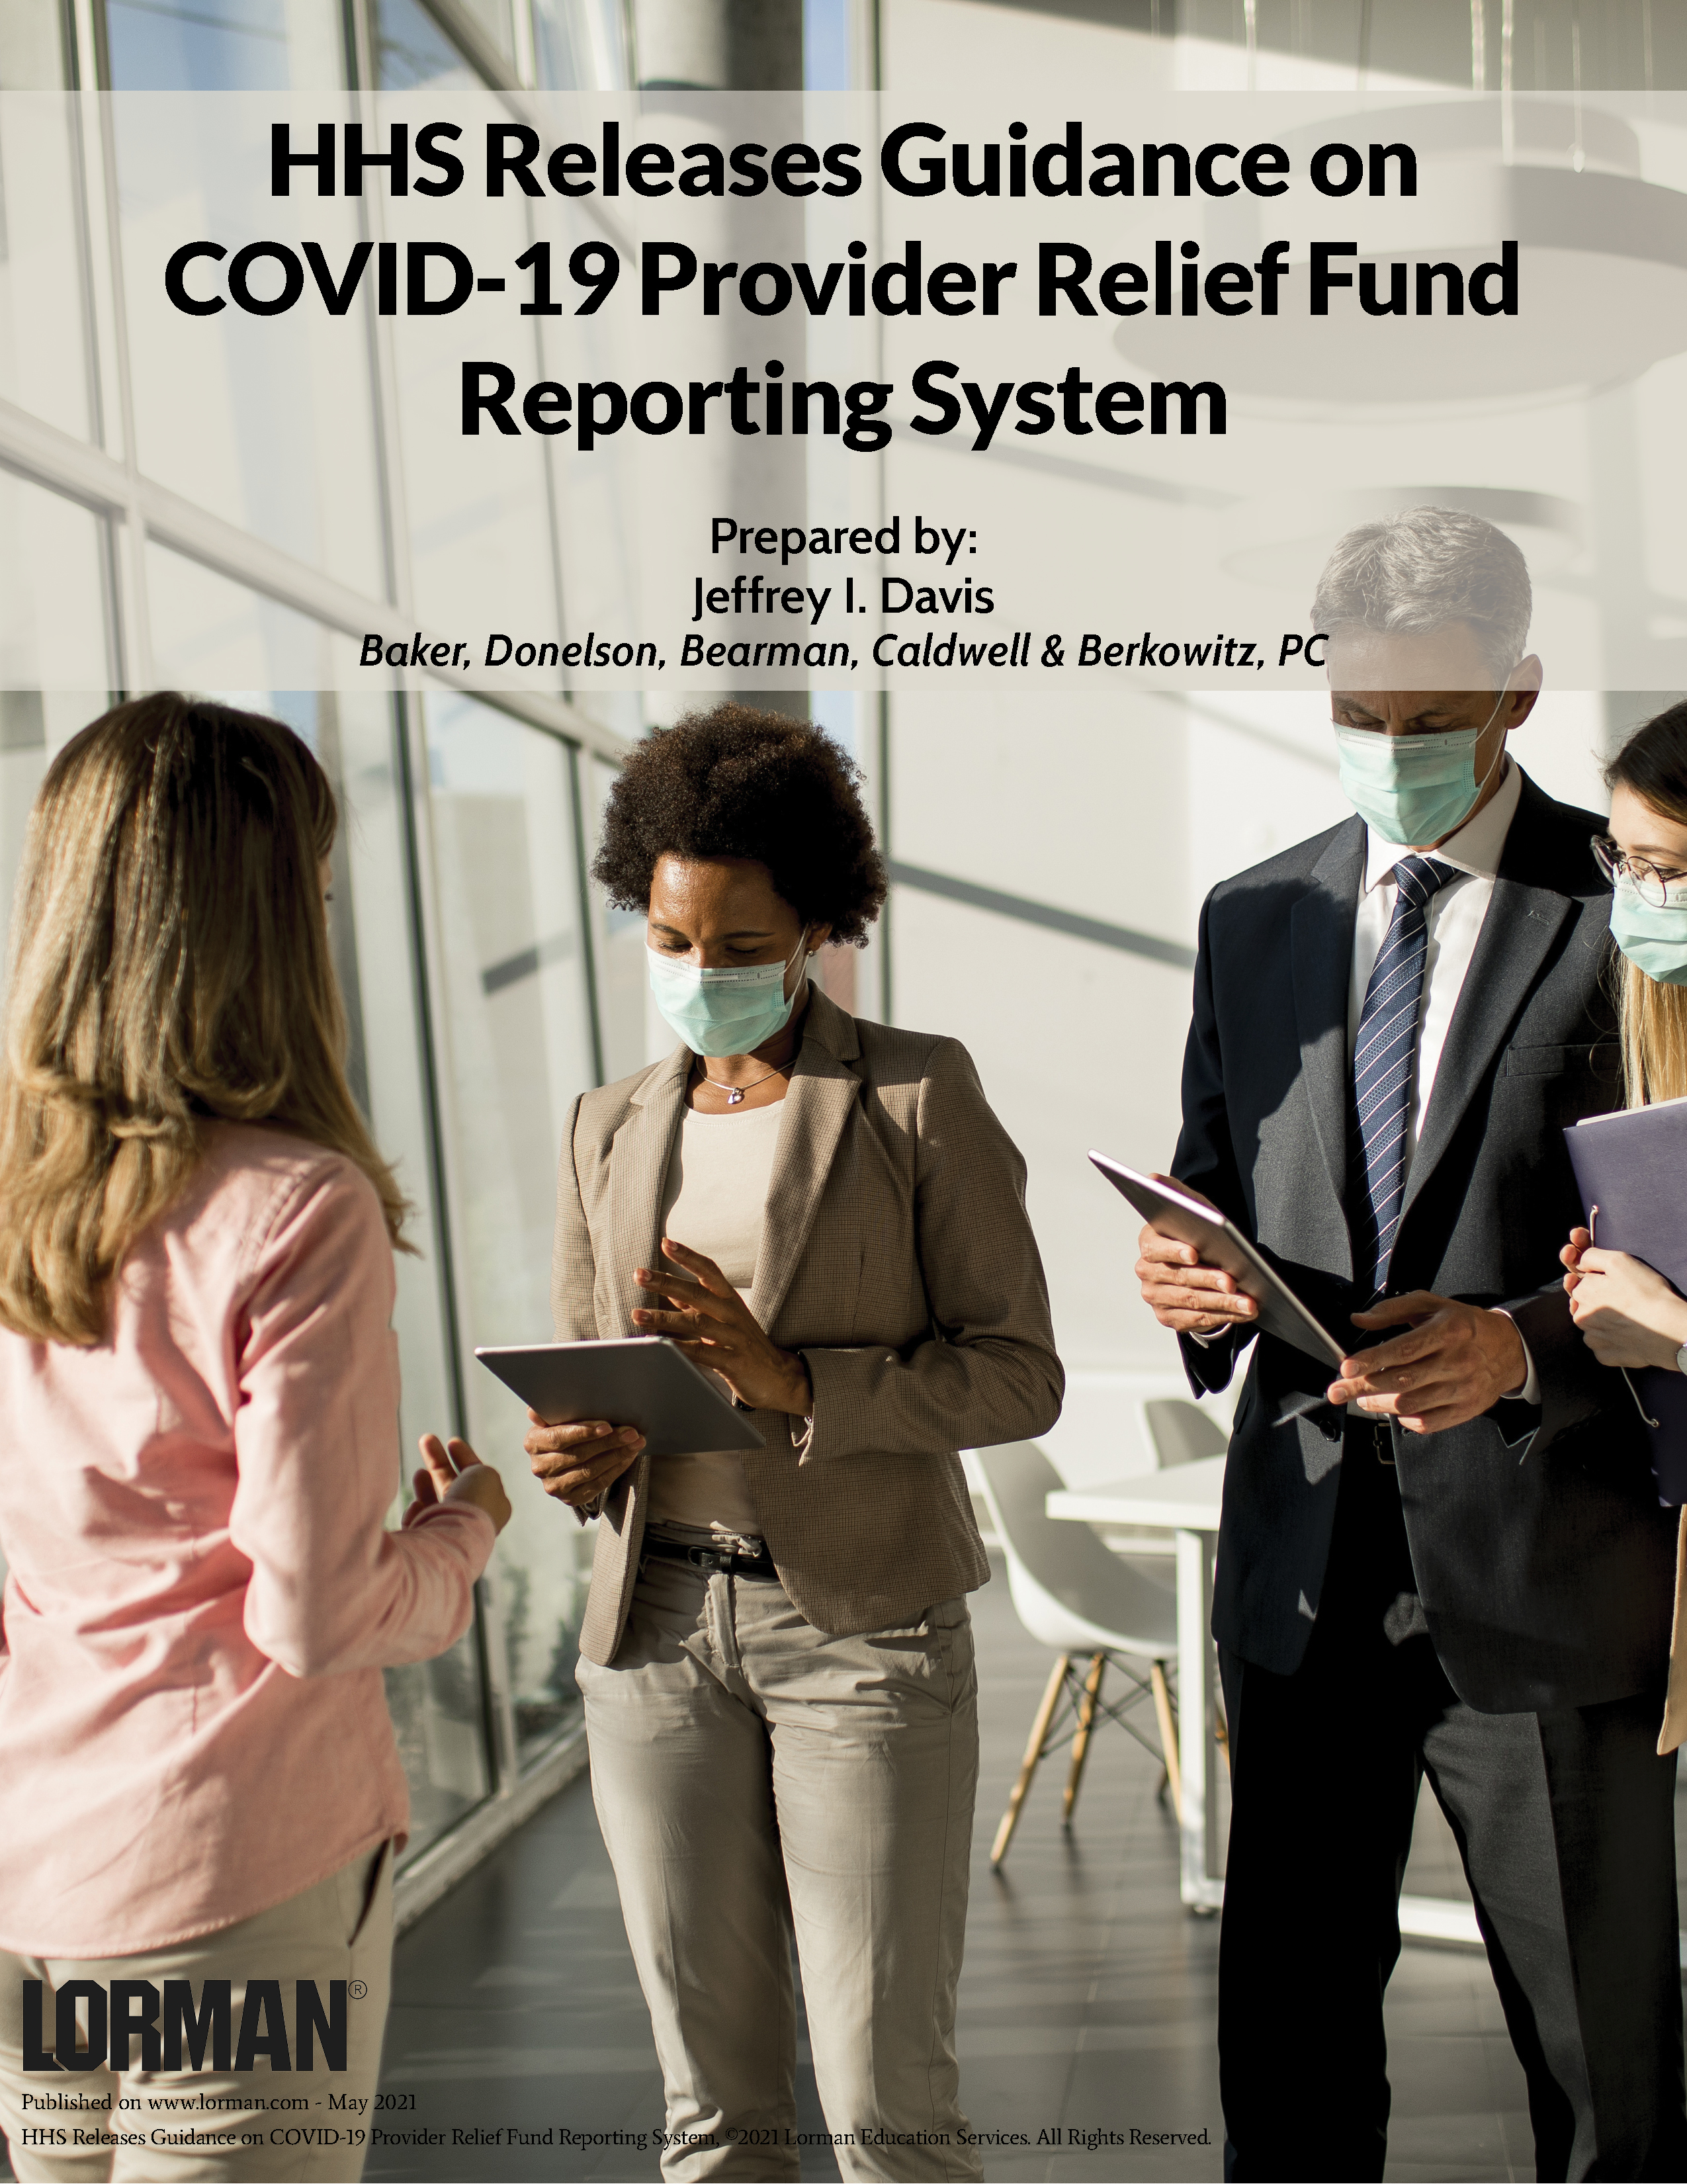 HHS Releases Guidance on COVID-19 Provider Relief Fund Reporting System